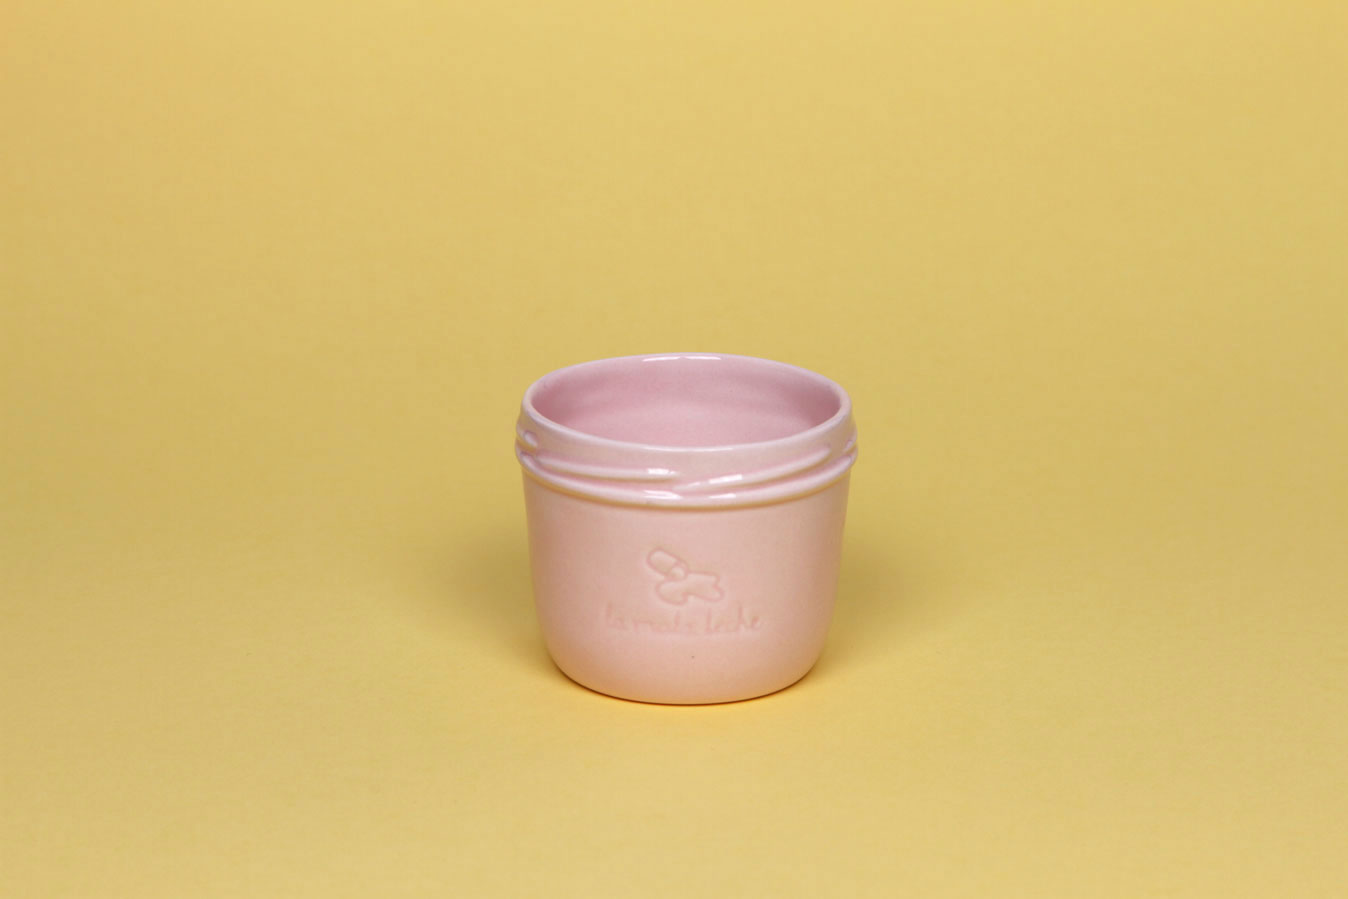 Delicate ceramic cup in light pink color.